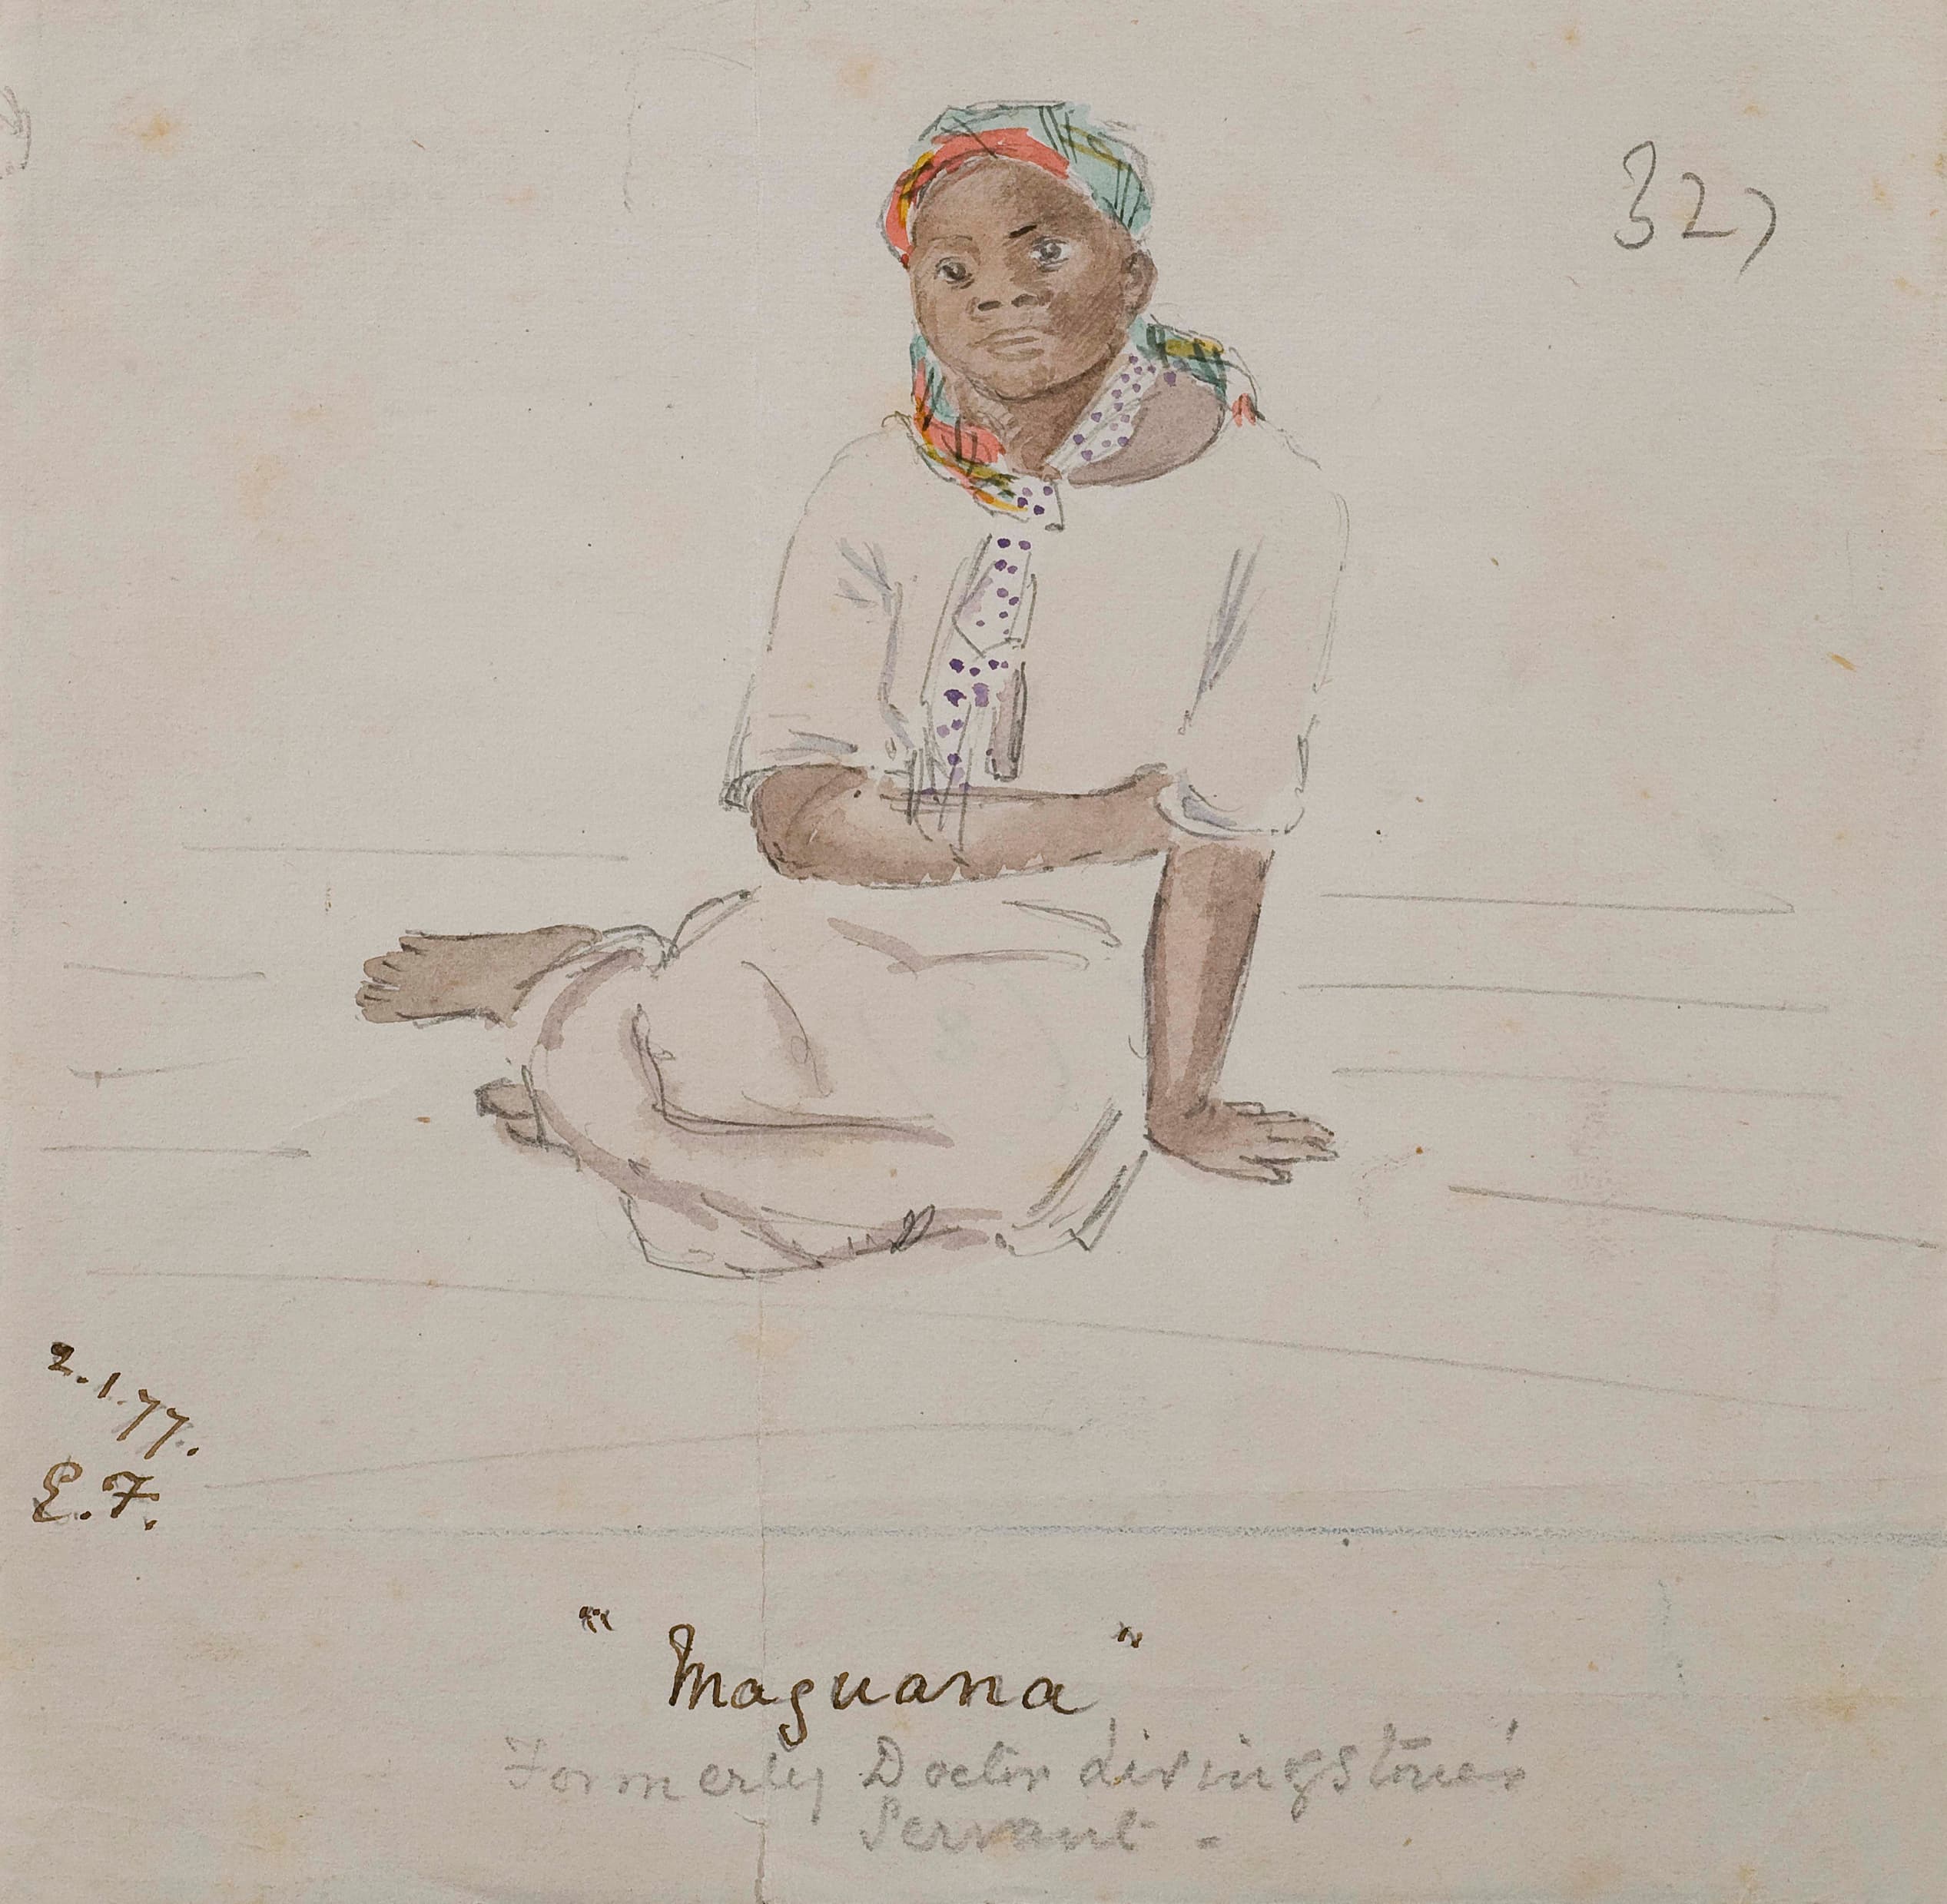 Maguana - formerly Dr. Livingstone's servant by Lilly Frere, 1877.